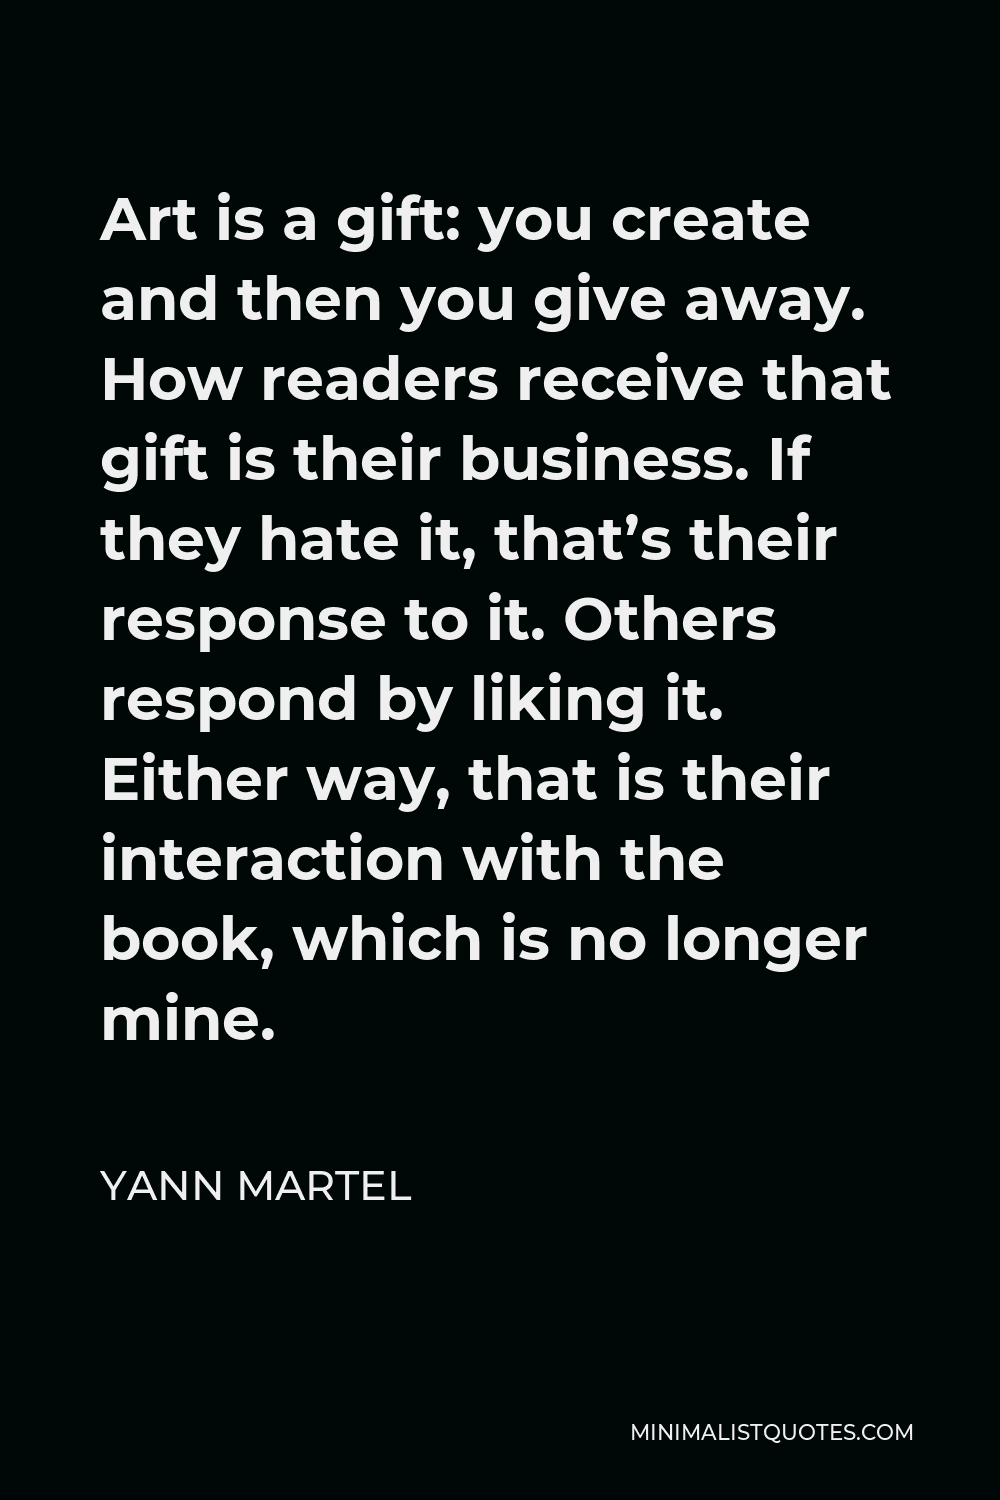 Yann Martel Quote - Art is a gift: you create and then you give away. How readers receive that gift is their business. If they hate it, that’s their response to it. Others respond by liking it. Either way, that is their interaction with the book, which is no longer mine.